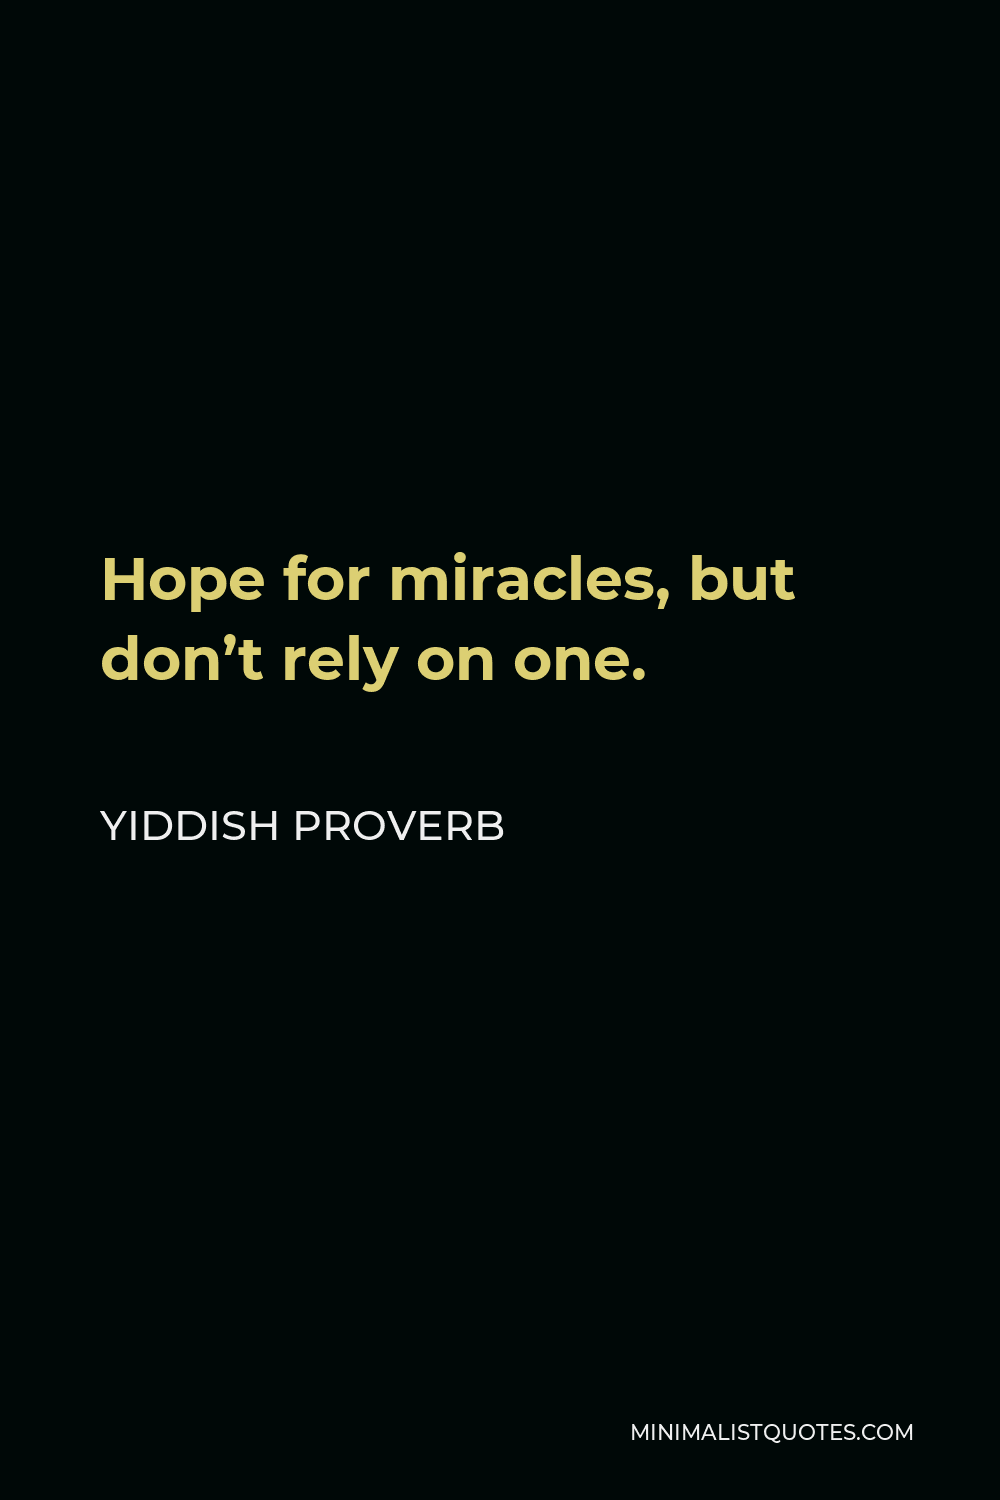 Yiddish Proverb Quote - Hope for miracles, but don’t rely on one.